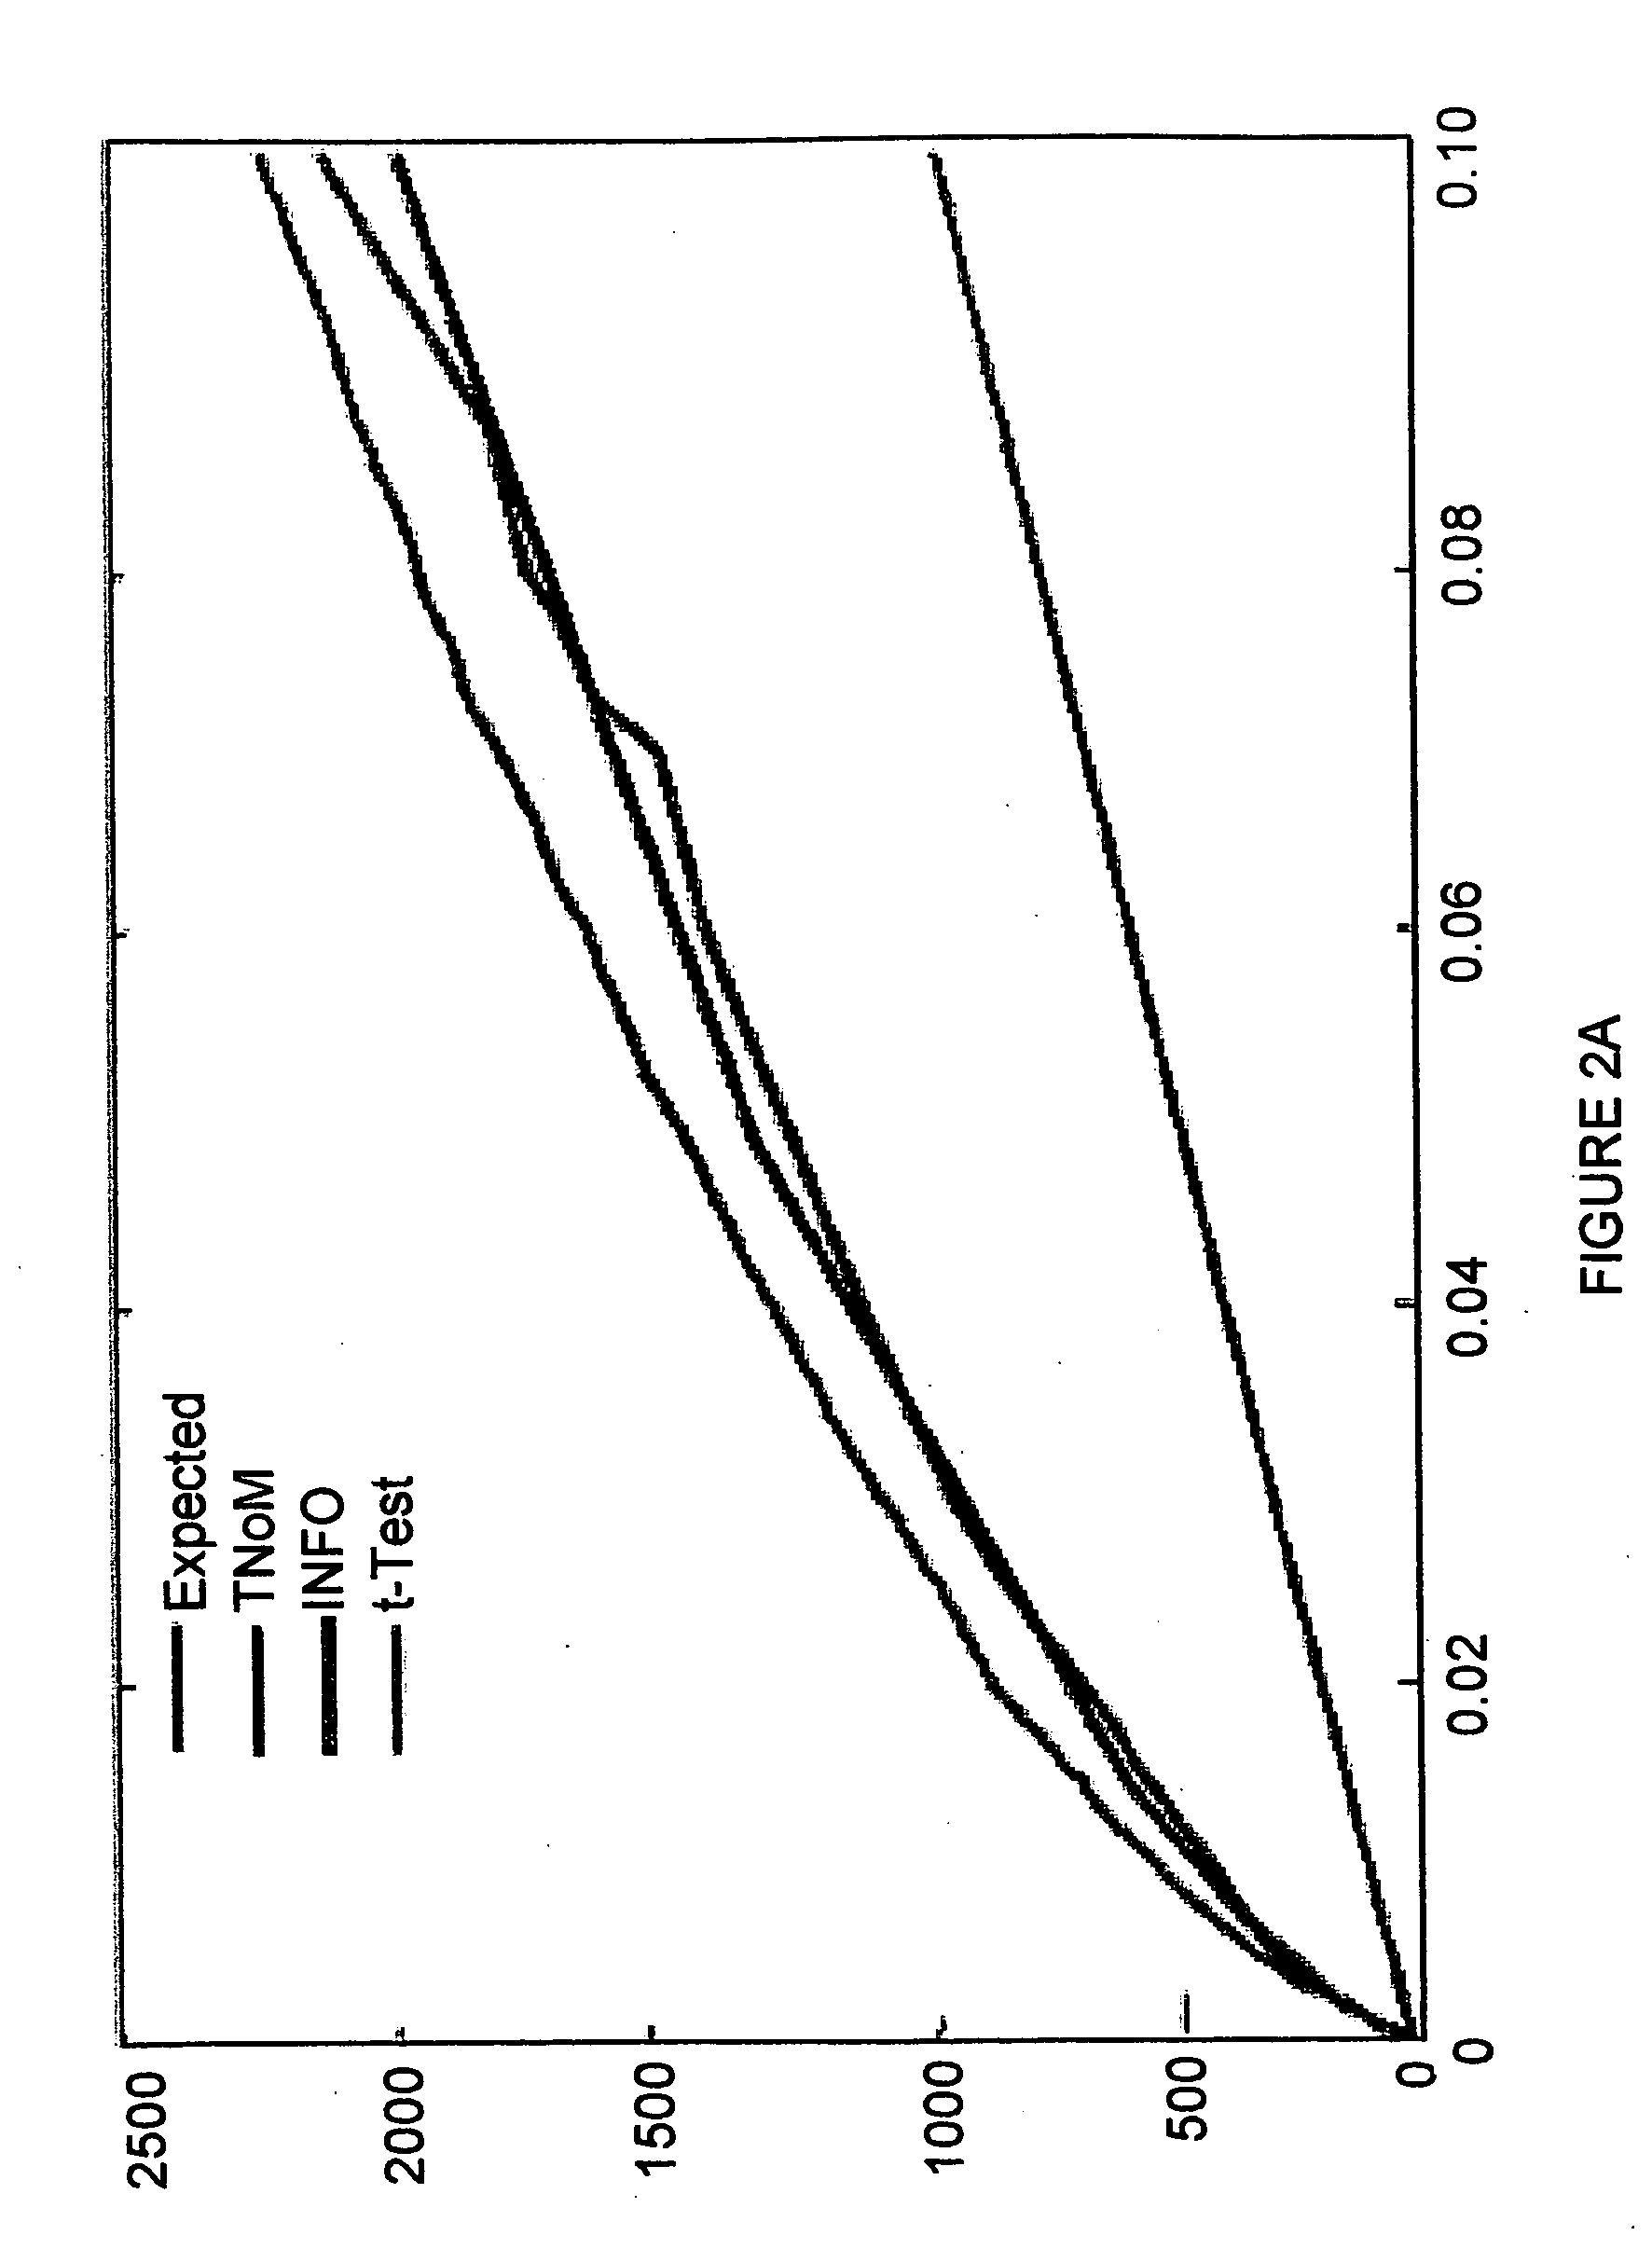 Peripheral blood cell markers useful for diagnosing multiple sclerosis and methods and kits utilizing same